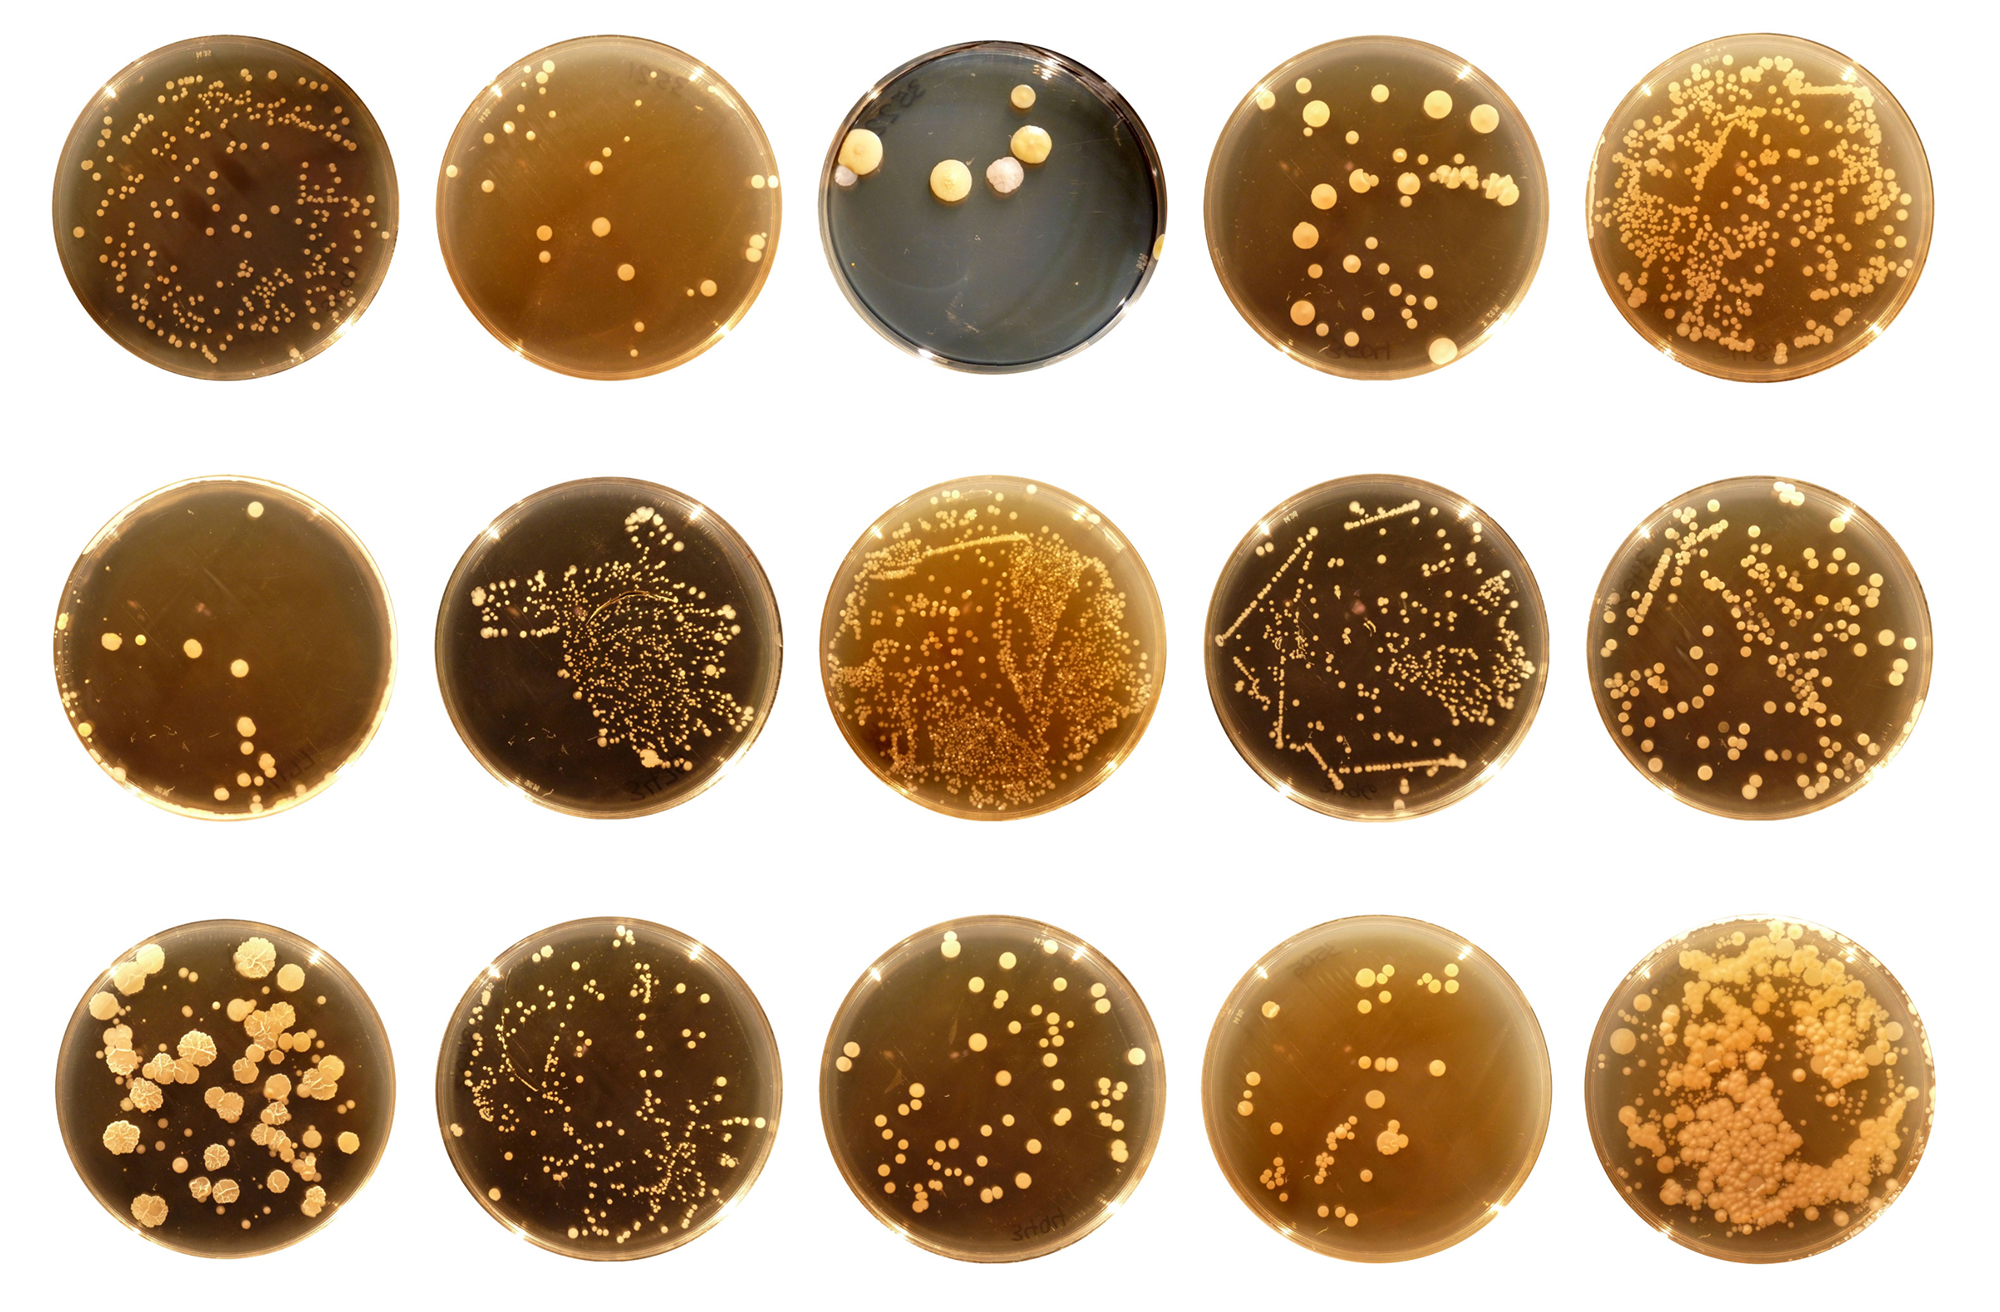 Researchers have identified more than 2,000 species of microbes -- a few of which are pictured here -- that live in human bellybutton habitats, as part of the Belly Button Project. Image: Neil McCoy, Rob Dunn Lab.